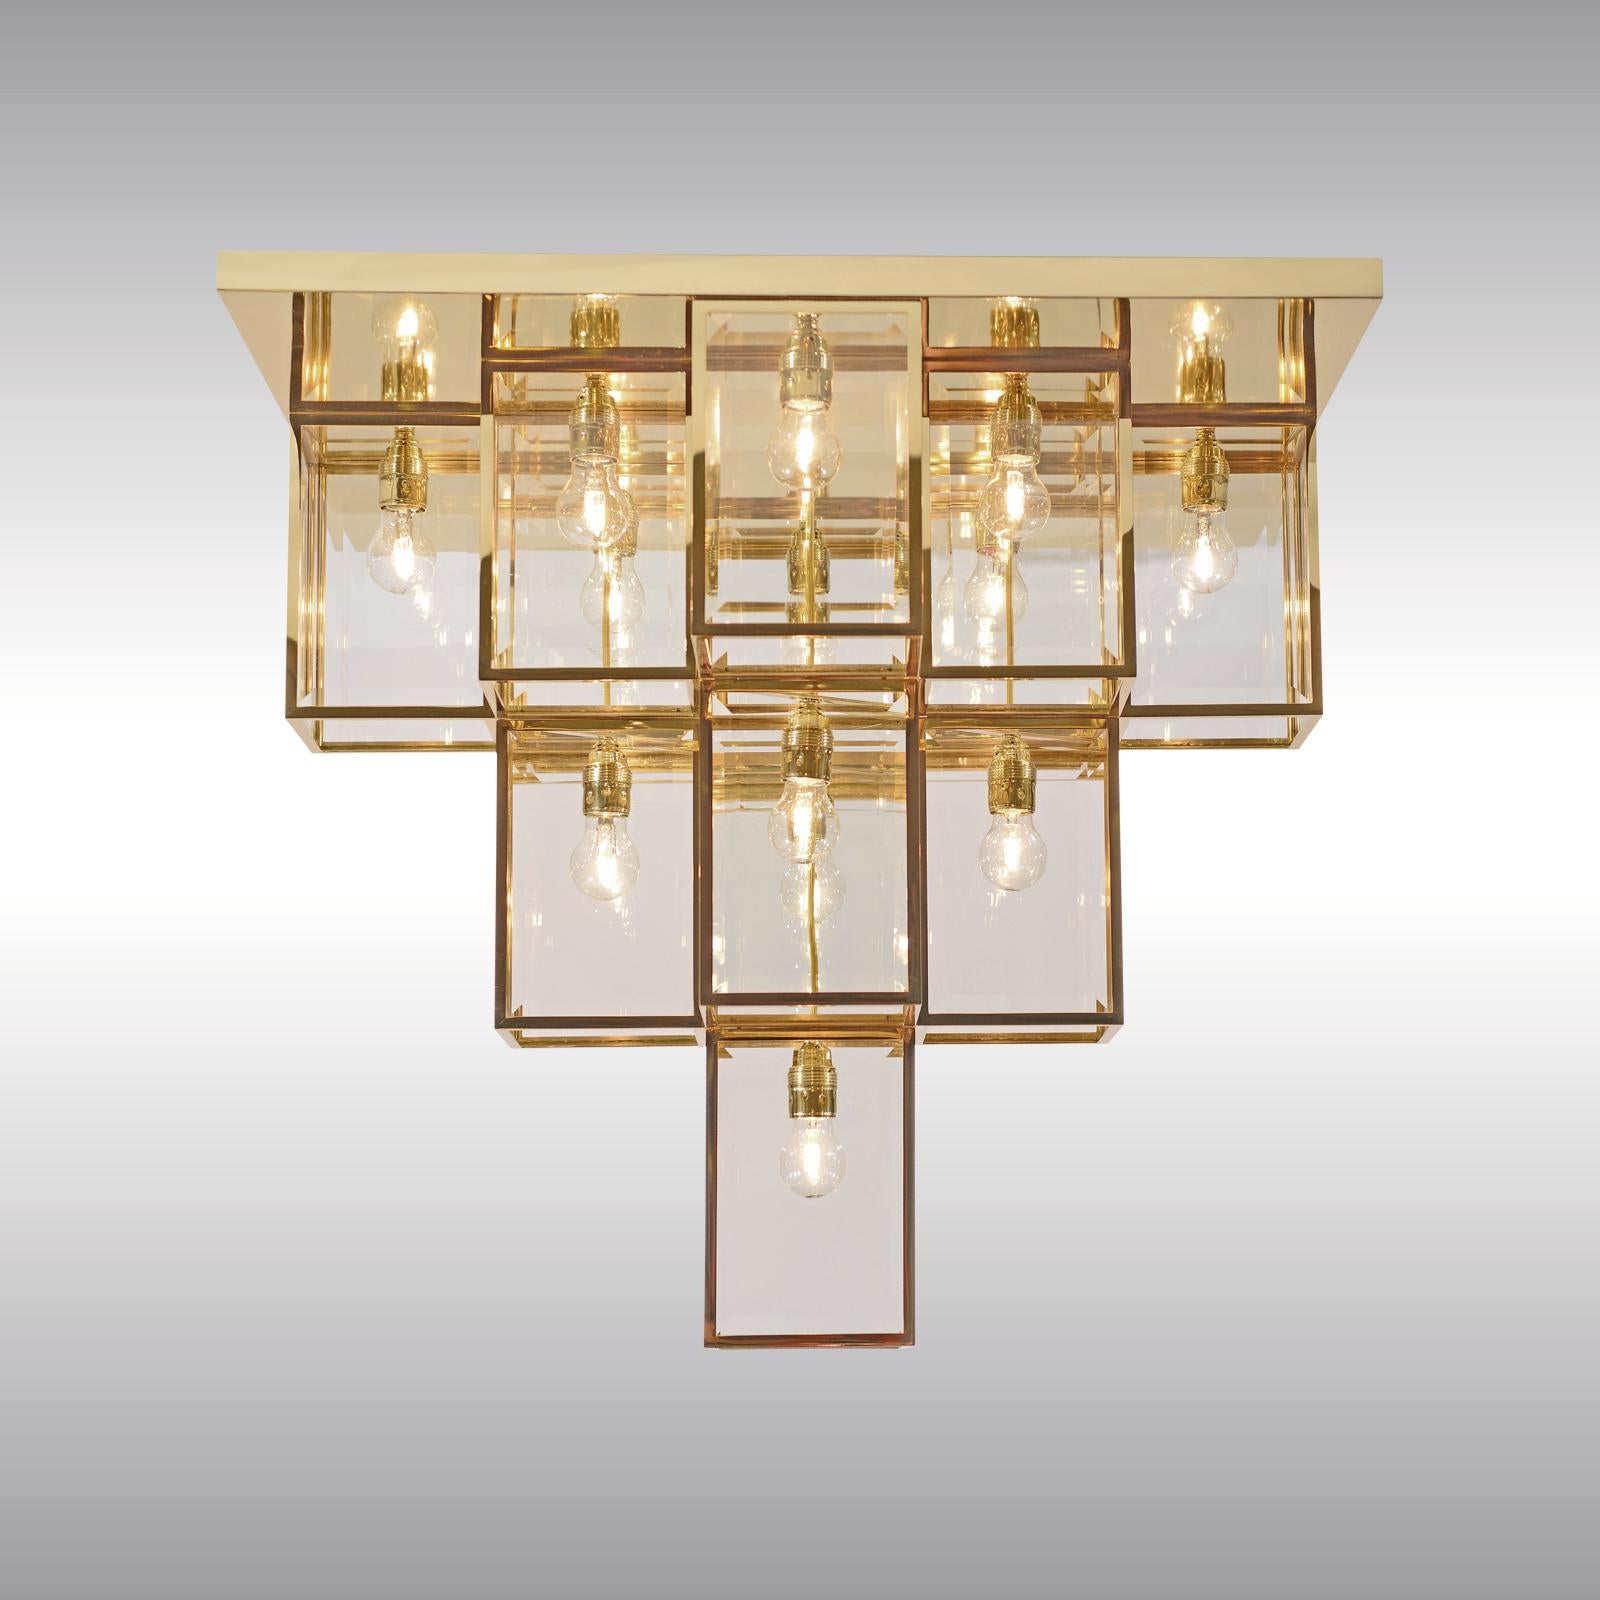 Vienna Secession Secessionist Josef Hoffmann Flush Mount Chandelier Re-Edition, Custom Made For Sale